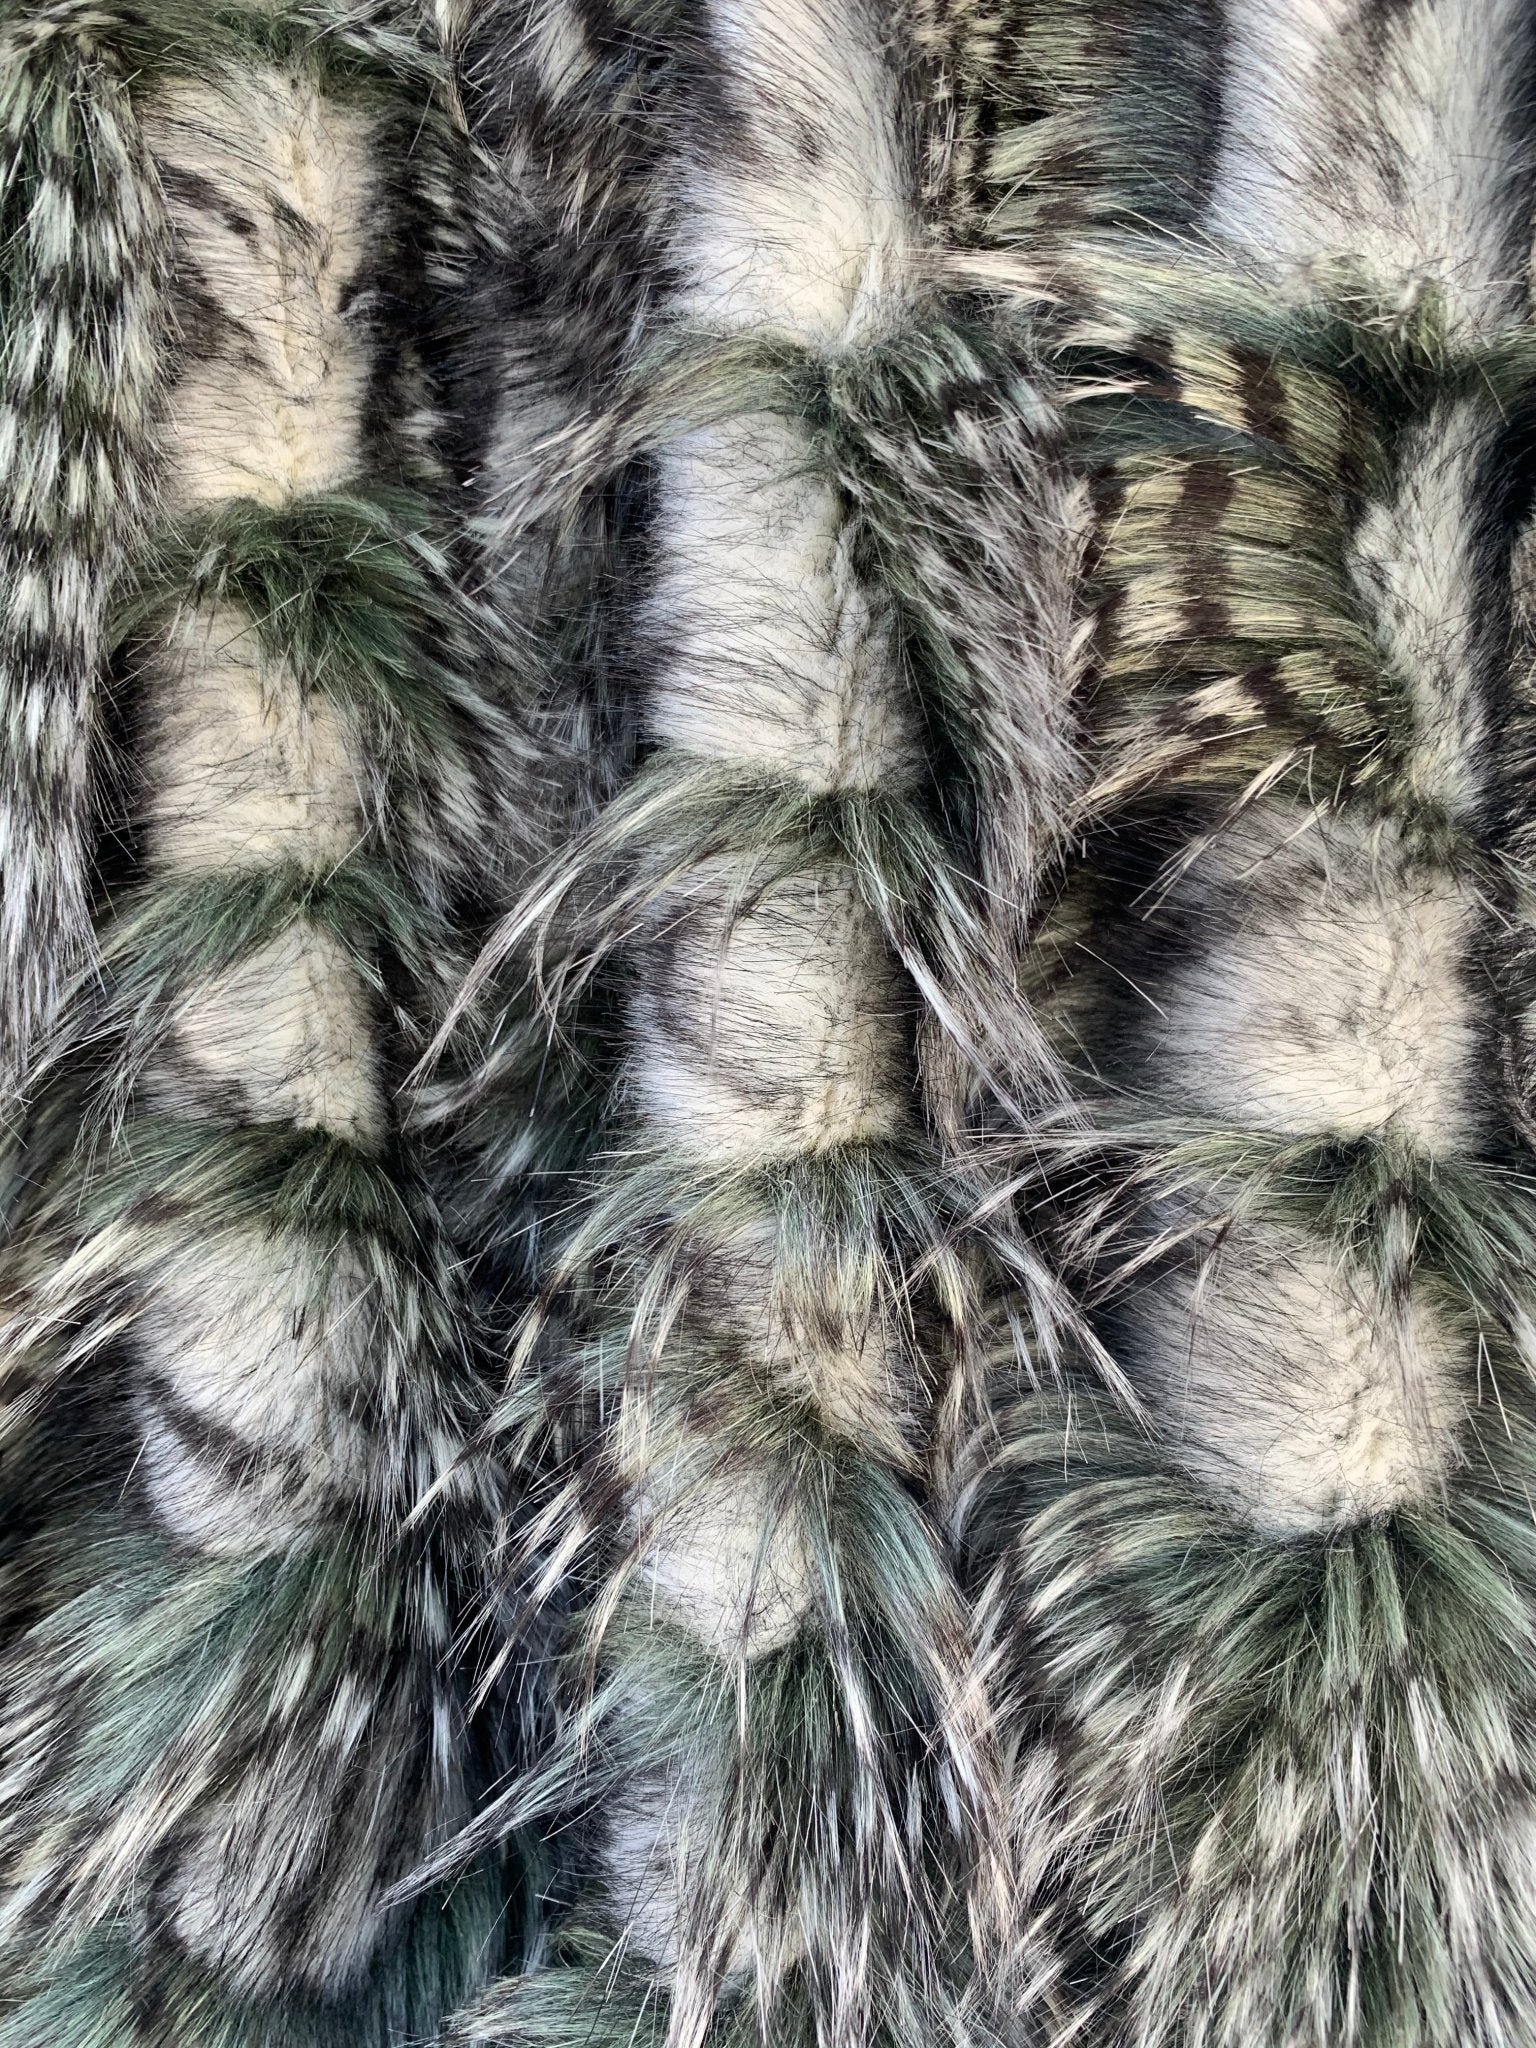 Faux Fake Fur Feathered Bird Long Pile Fabric | Faux Fur MaterialICEFABRICICE FABRICSOlive GreenBy The Yard (60 inches Wide)Faux Fake Fur Feathered Bird Long Pile Fabric | Faux Fur Material ICEFABRIC Olive Green